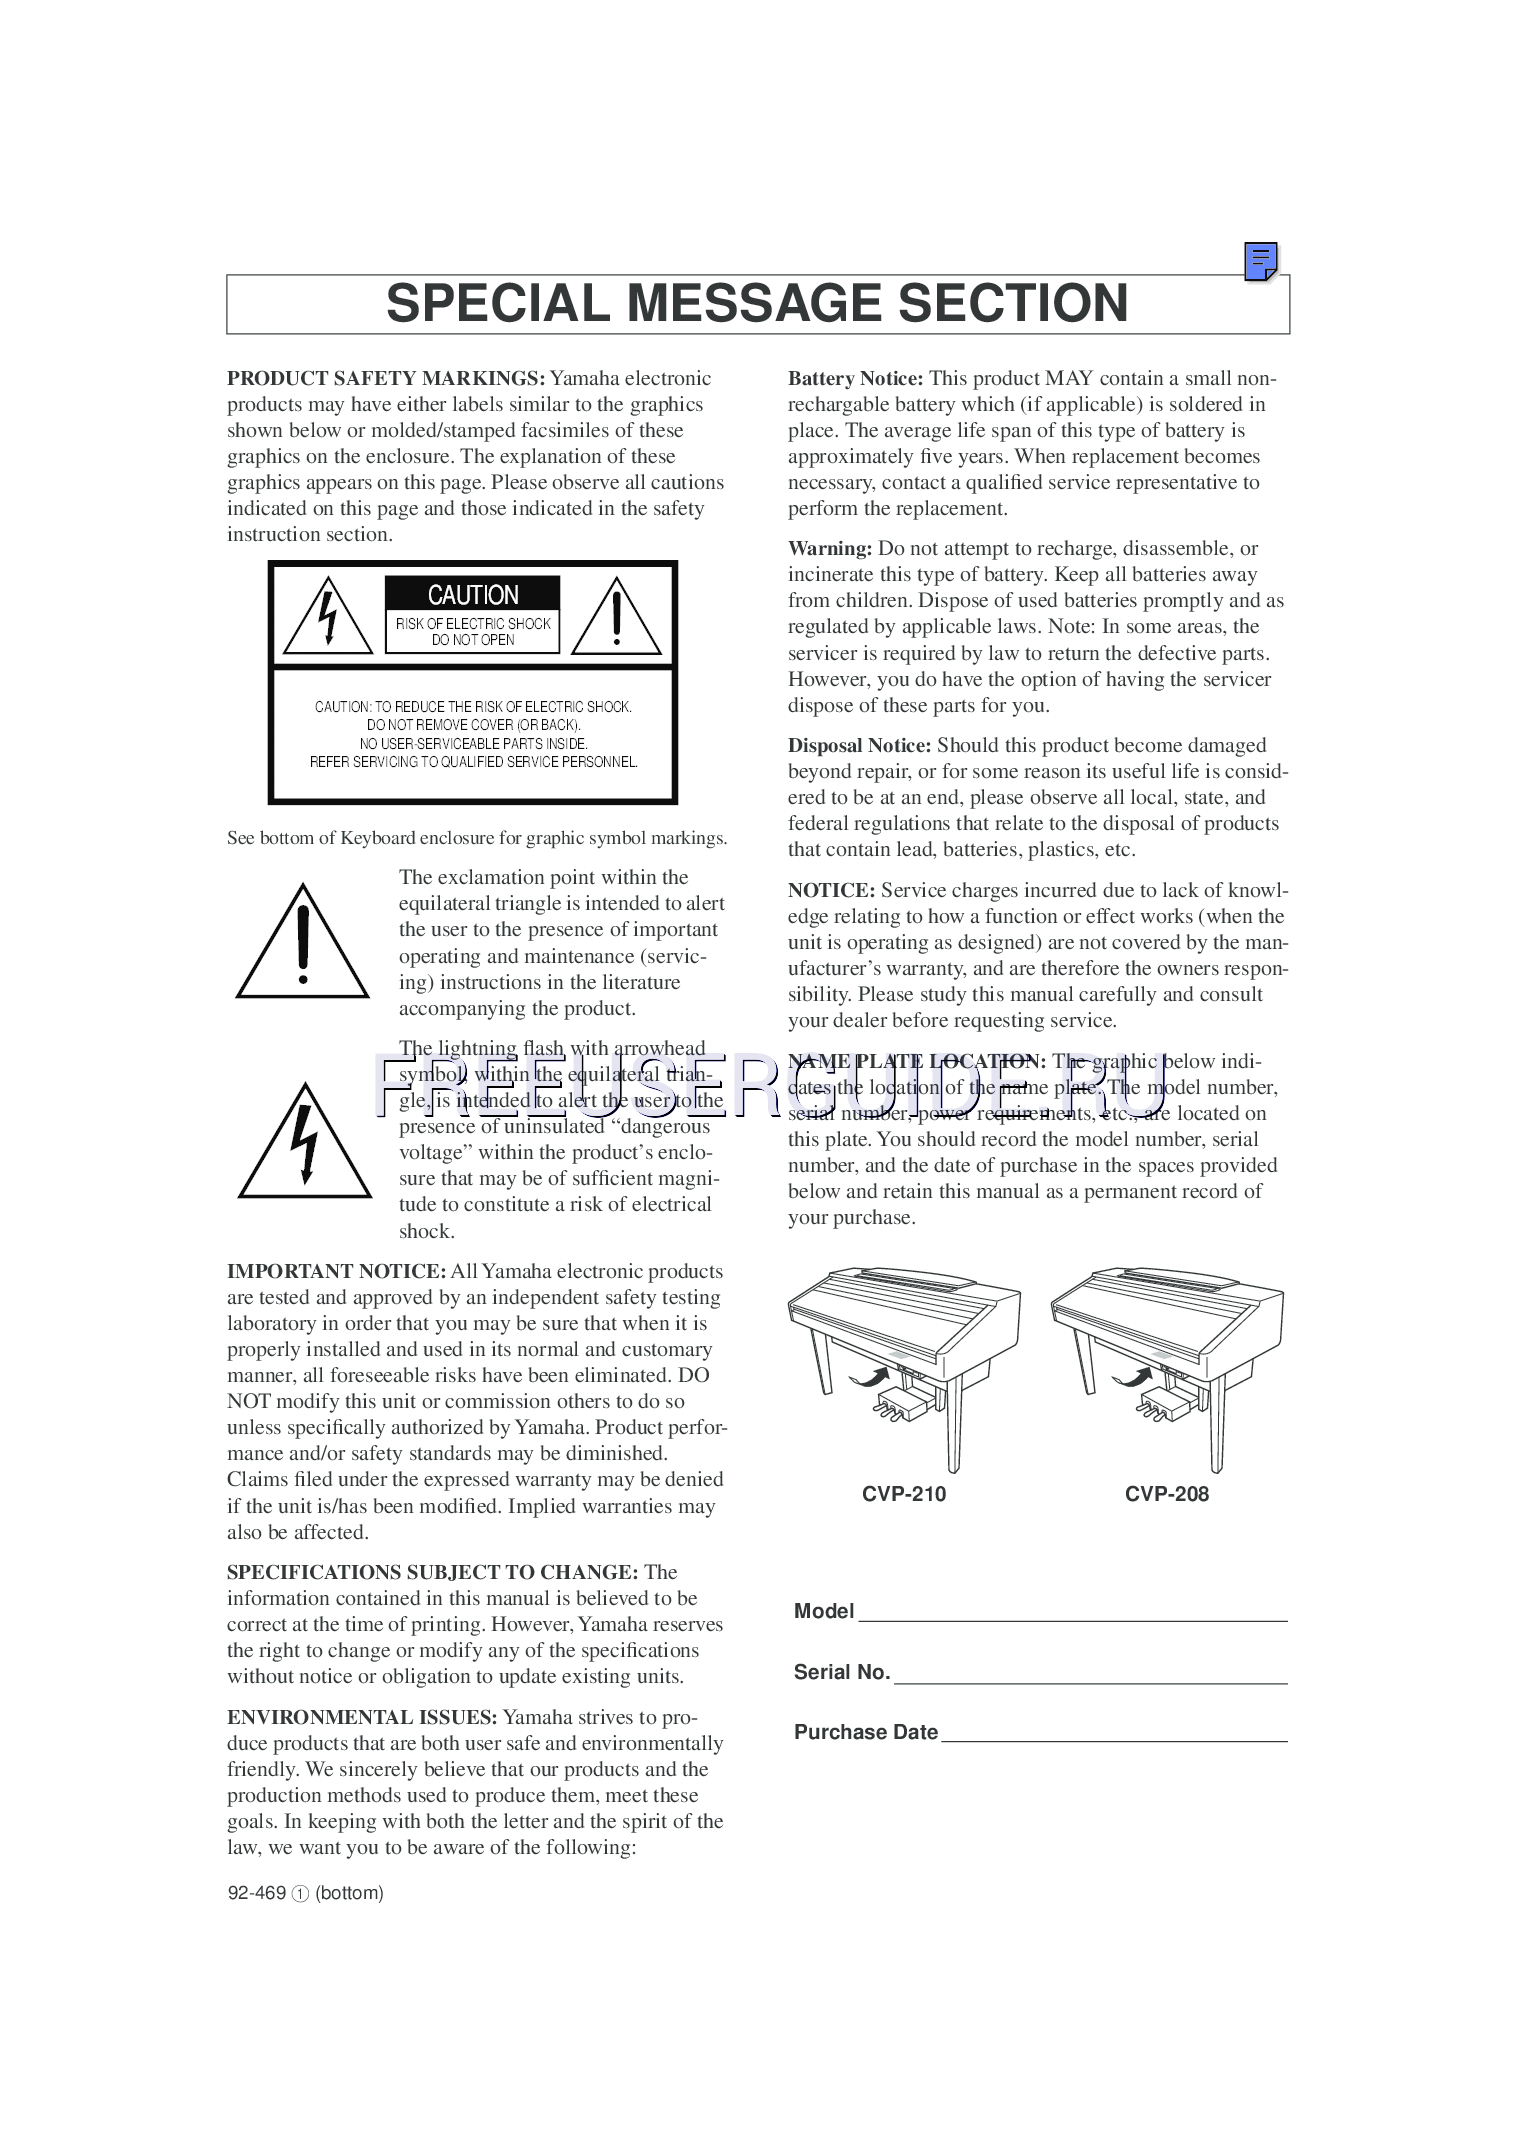 Read online User's Manual for Yamaha CVP-208 (Page 1)